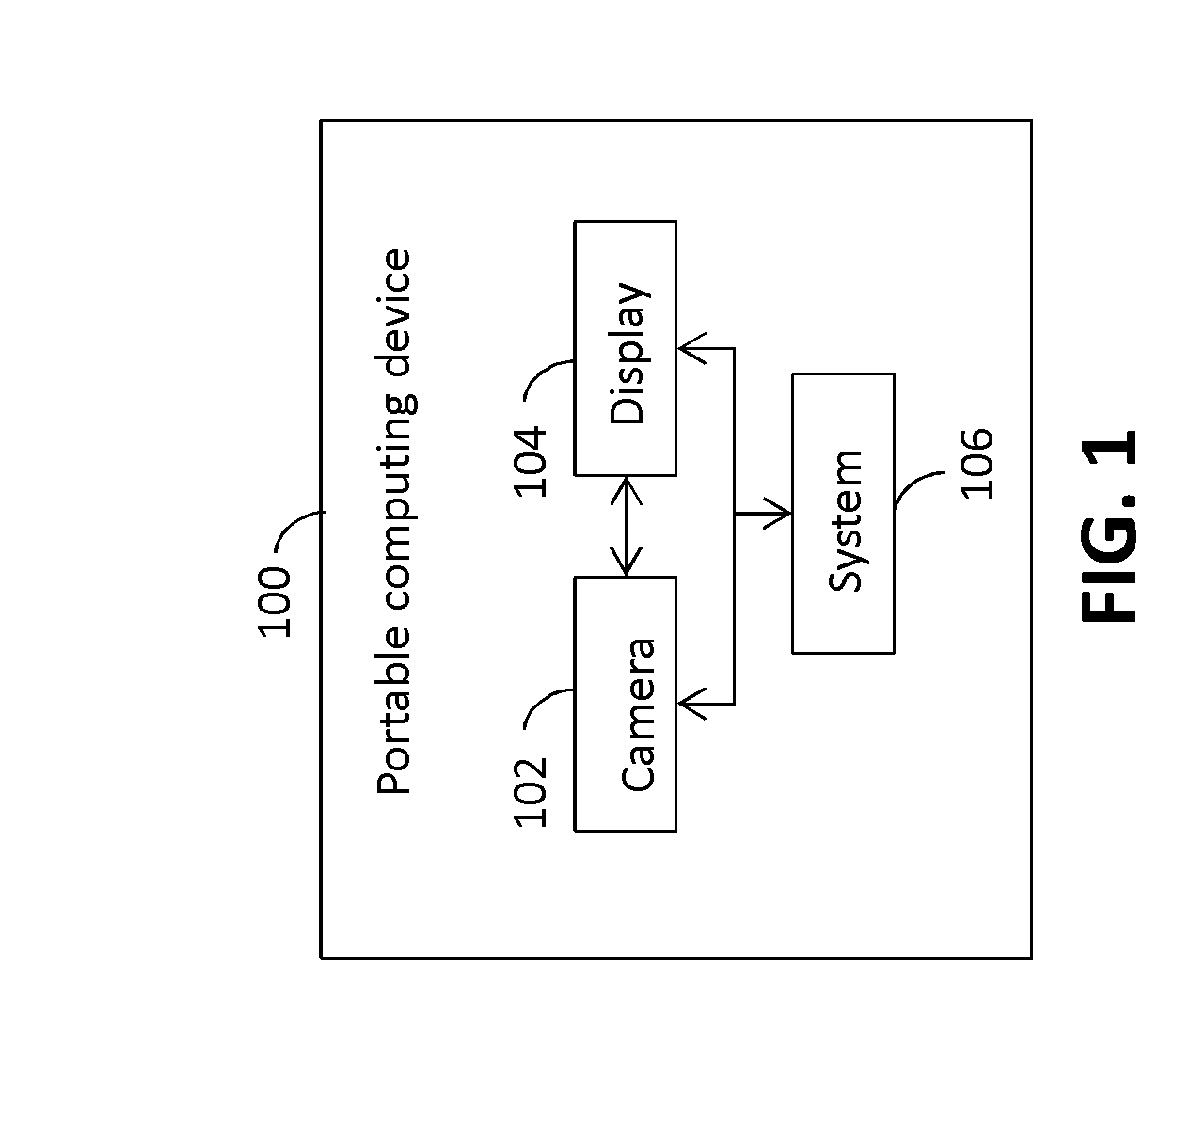 System and method for providing real-time guidance to a user